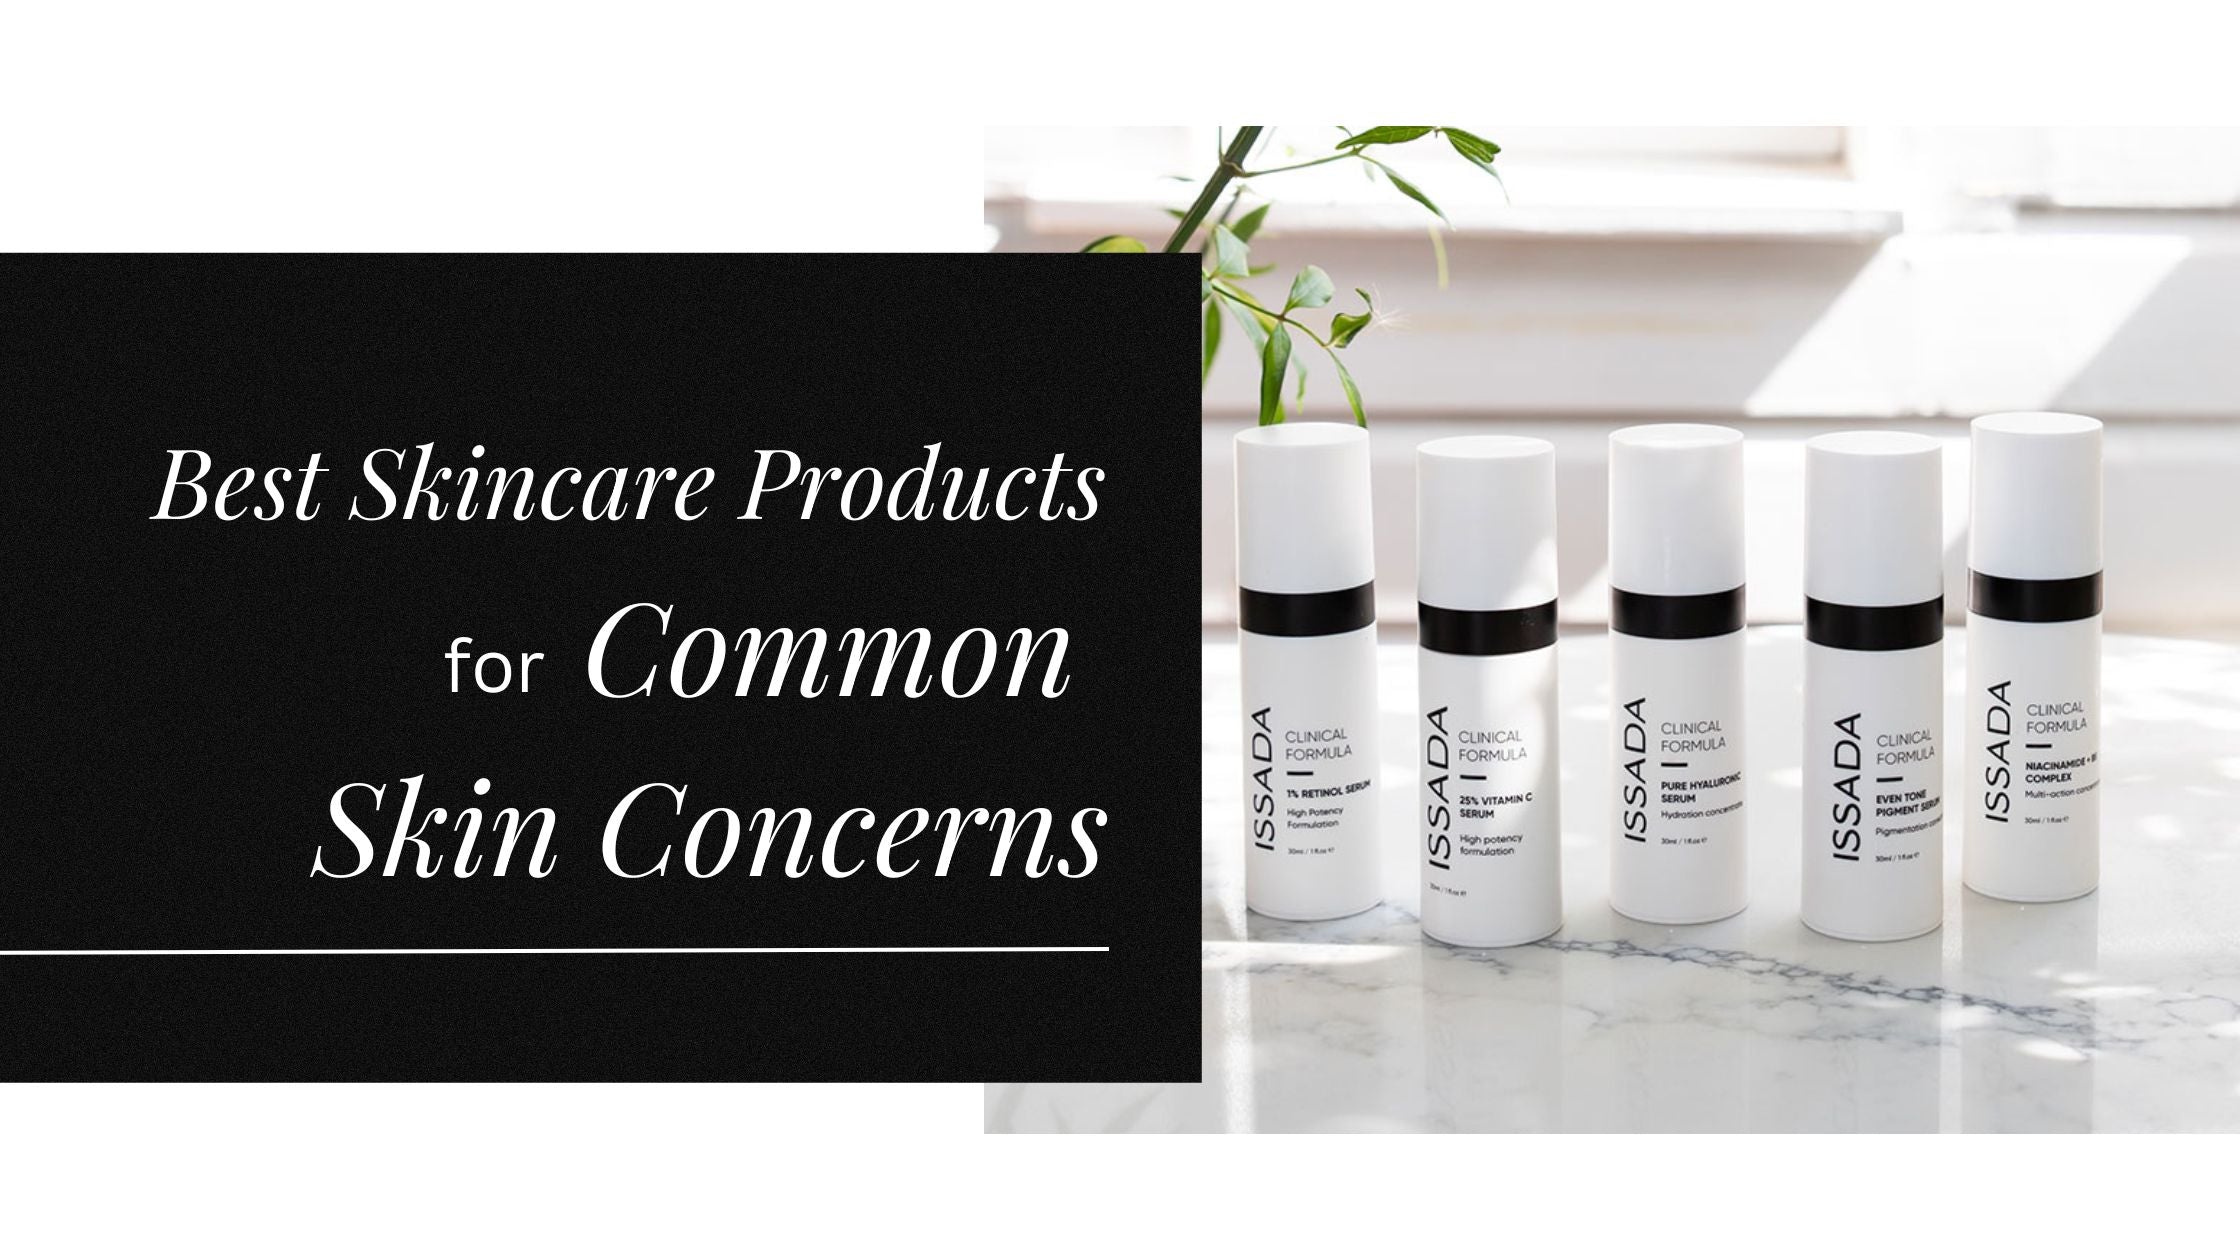 Our Best Skincare Products for Common Skin Concerns